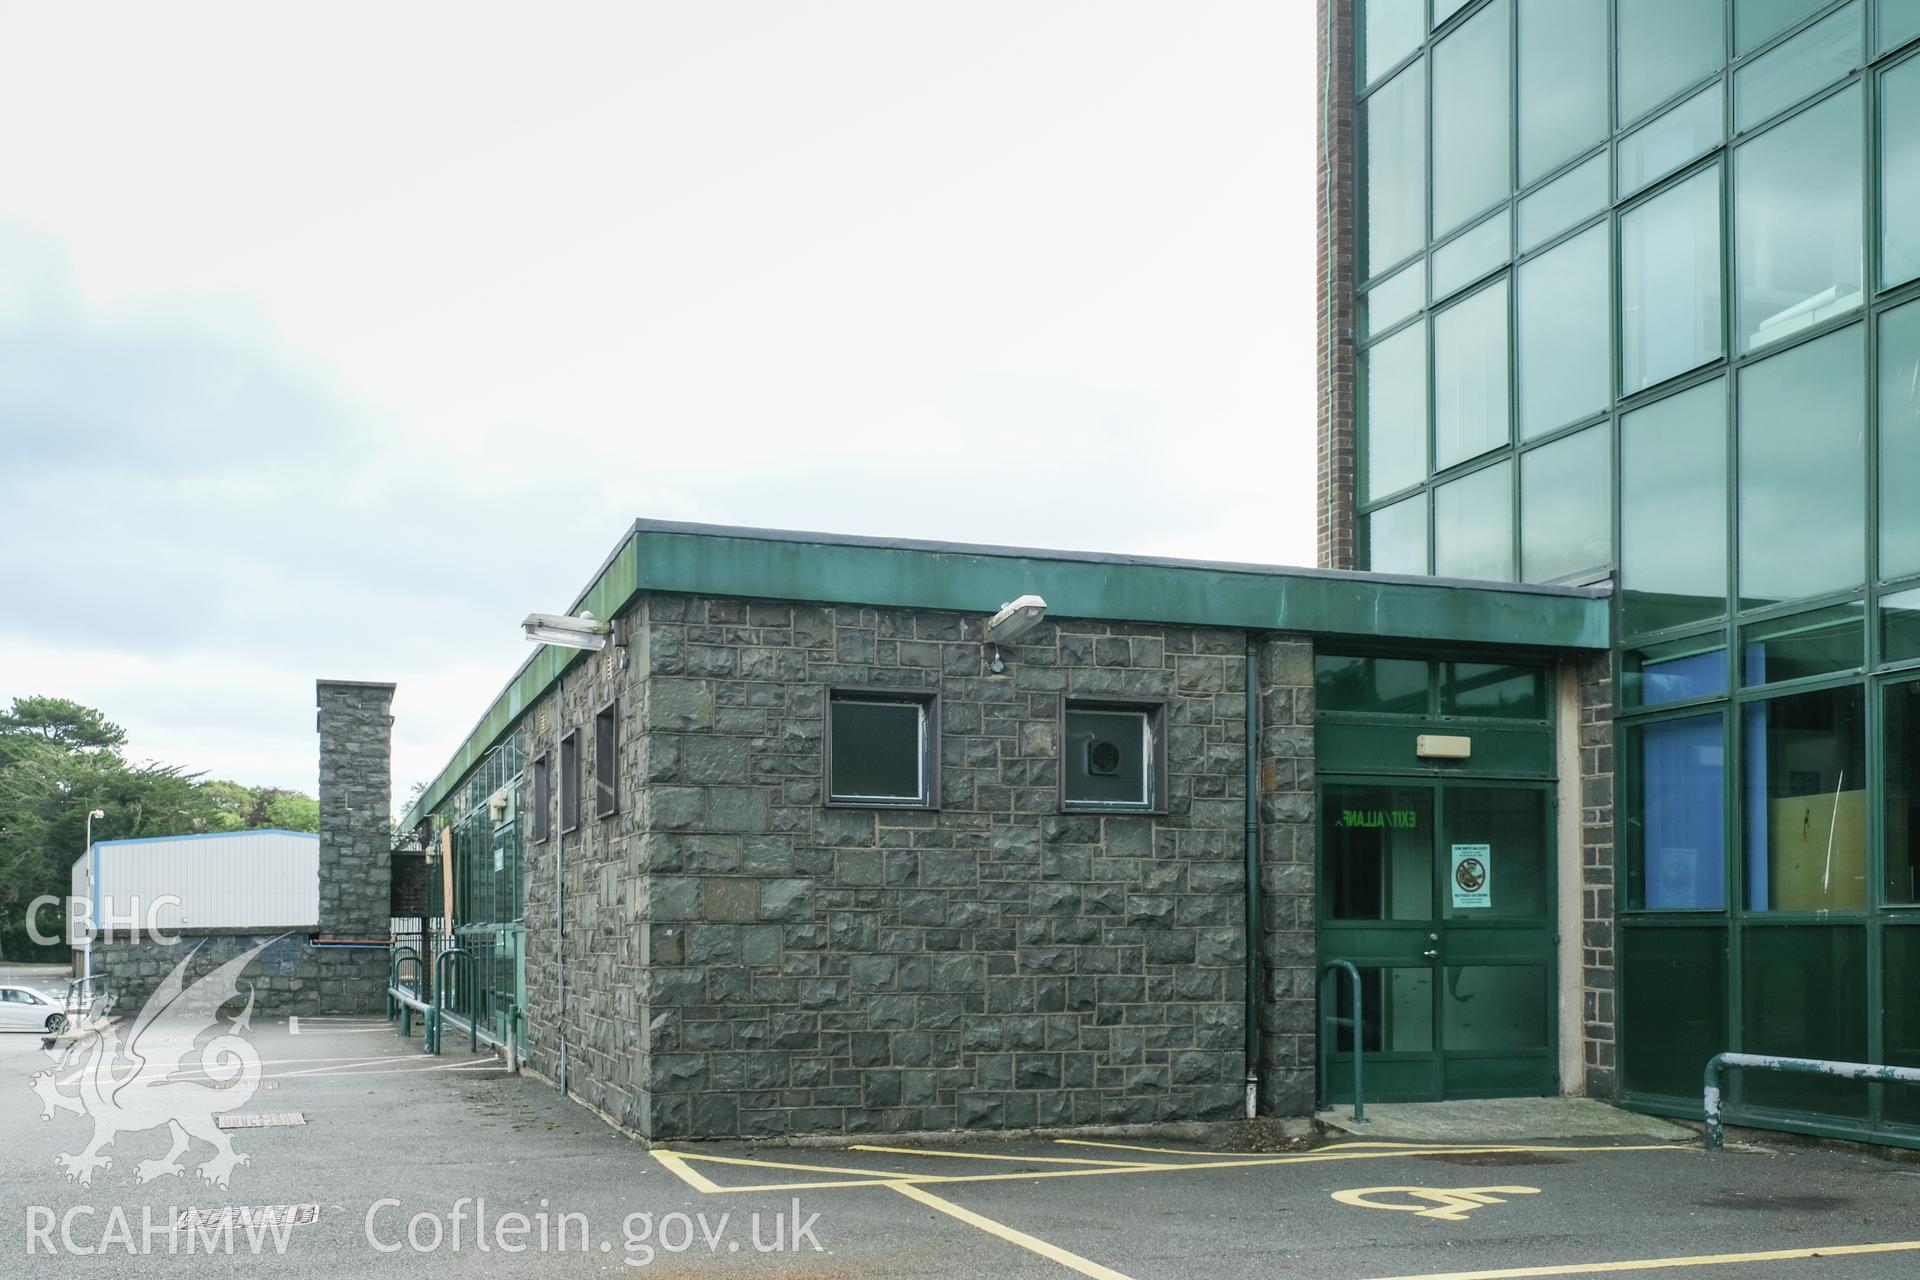 Digital colour photograph showing detailed exterior view of stone wall and entrance at Caernarfonshire Technical College, Bangor. Photographed by Dilys Morgan and donated by Wyn Thomas of Grwp Llandrillo-Menai Further Education College, 2019.